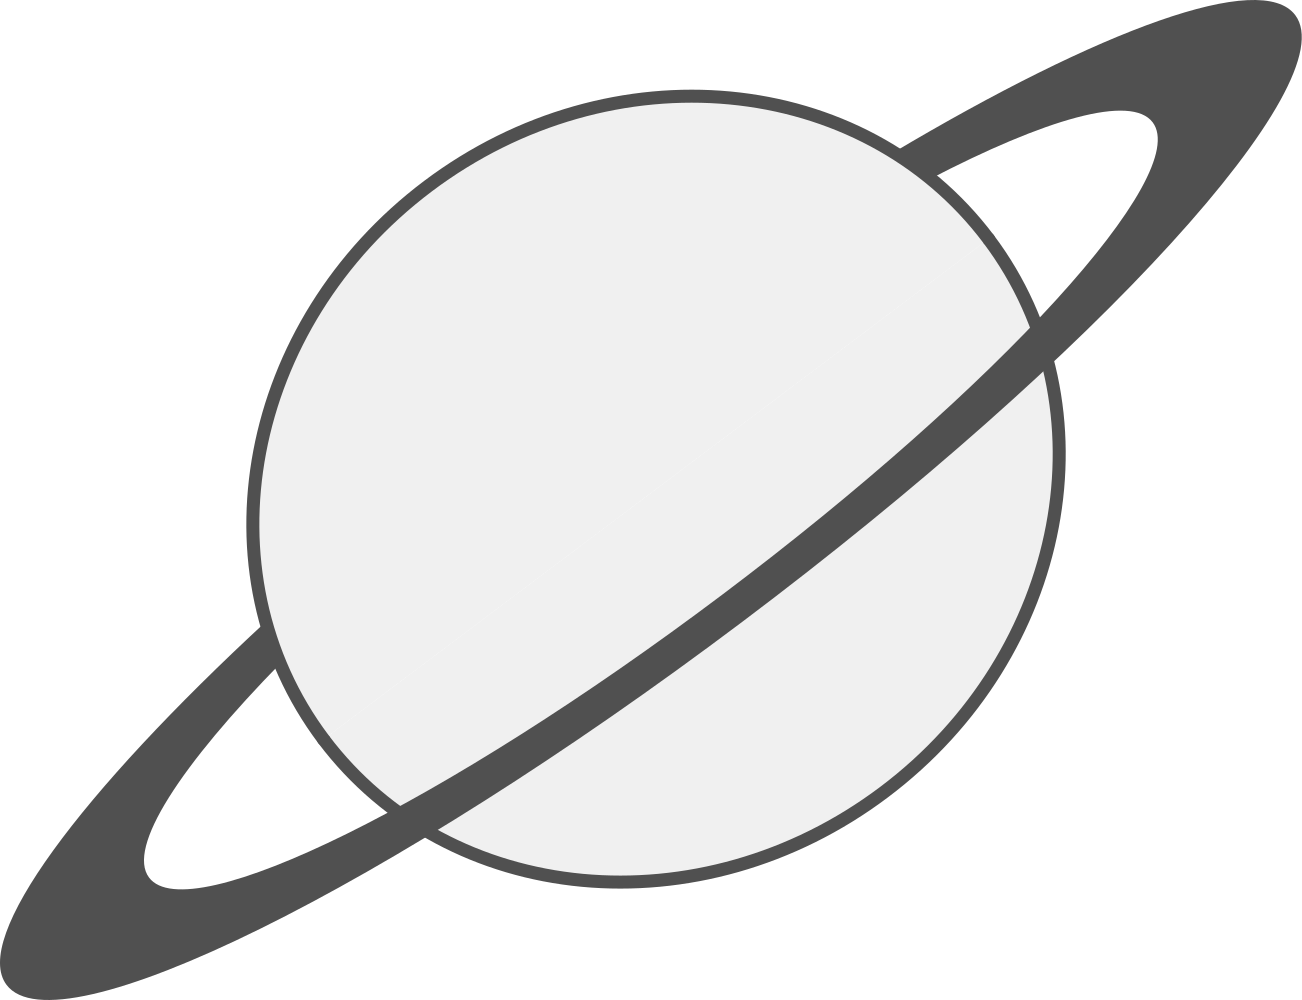 Gray planet with ring clip art image